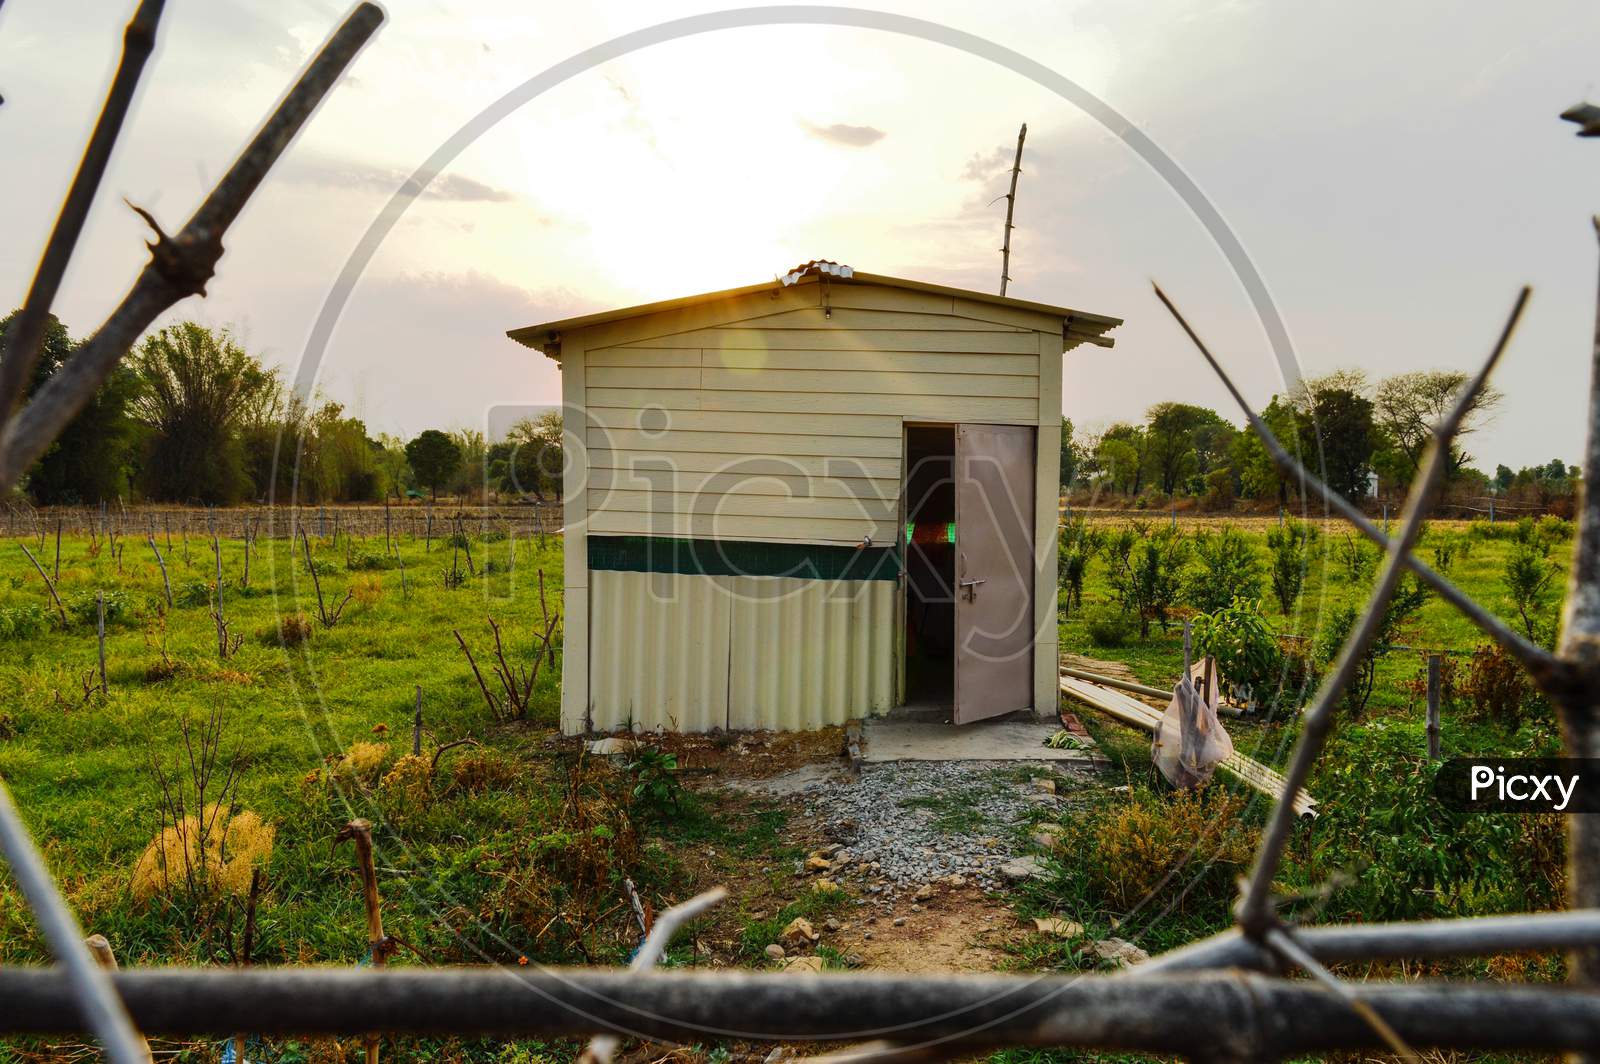 A Beautiful Landscape Evening View Of Hut And Field Of Pomegranate And Apple Plumb At Indian Village.